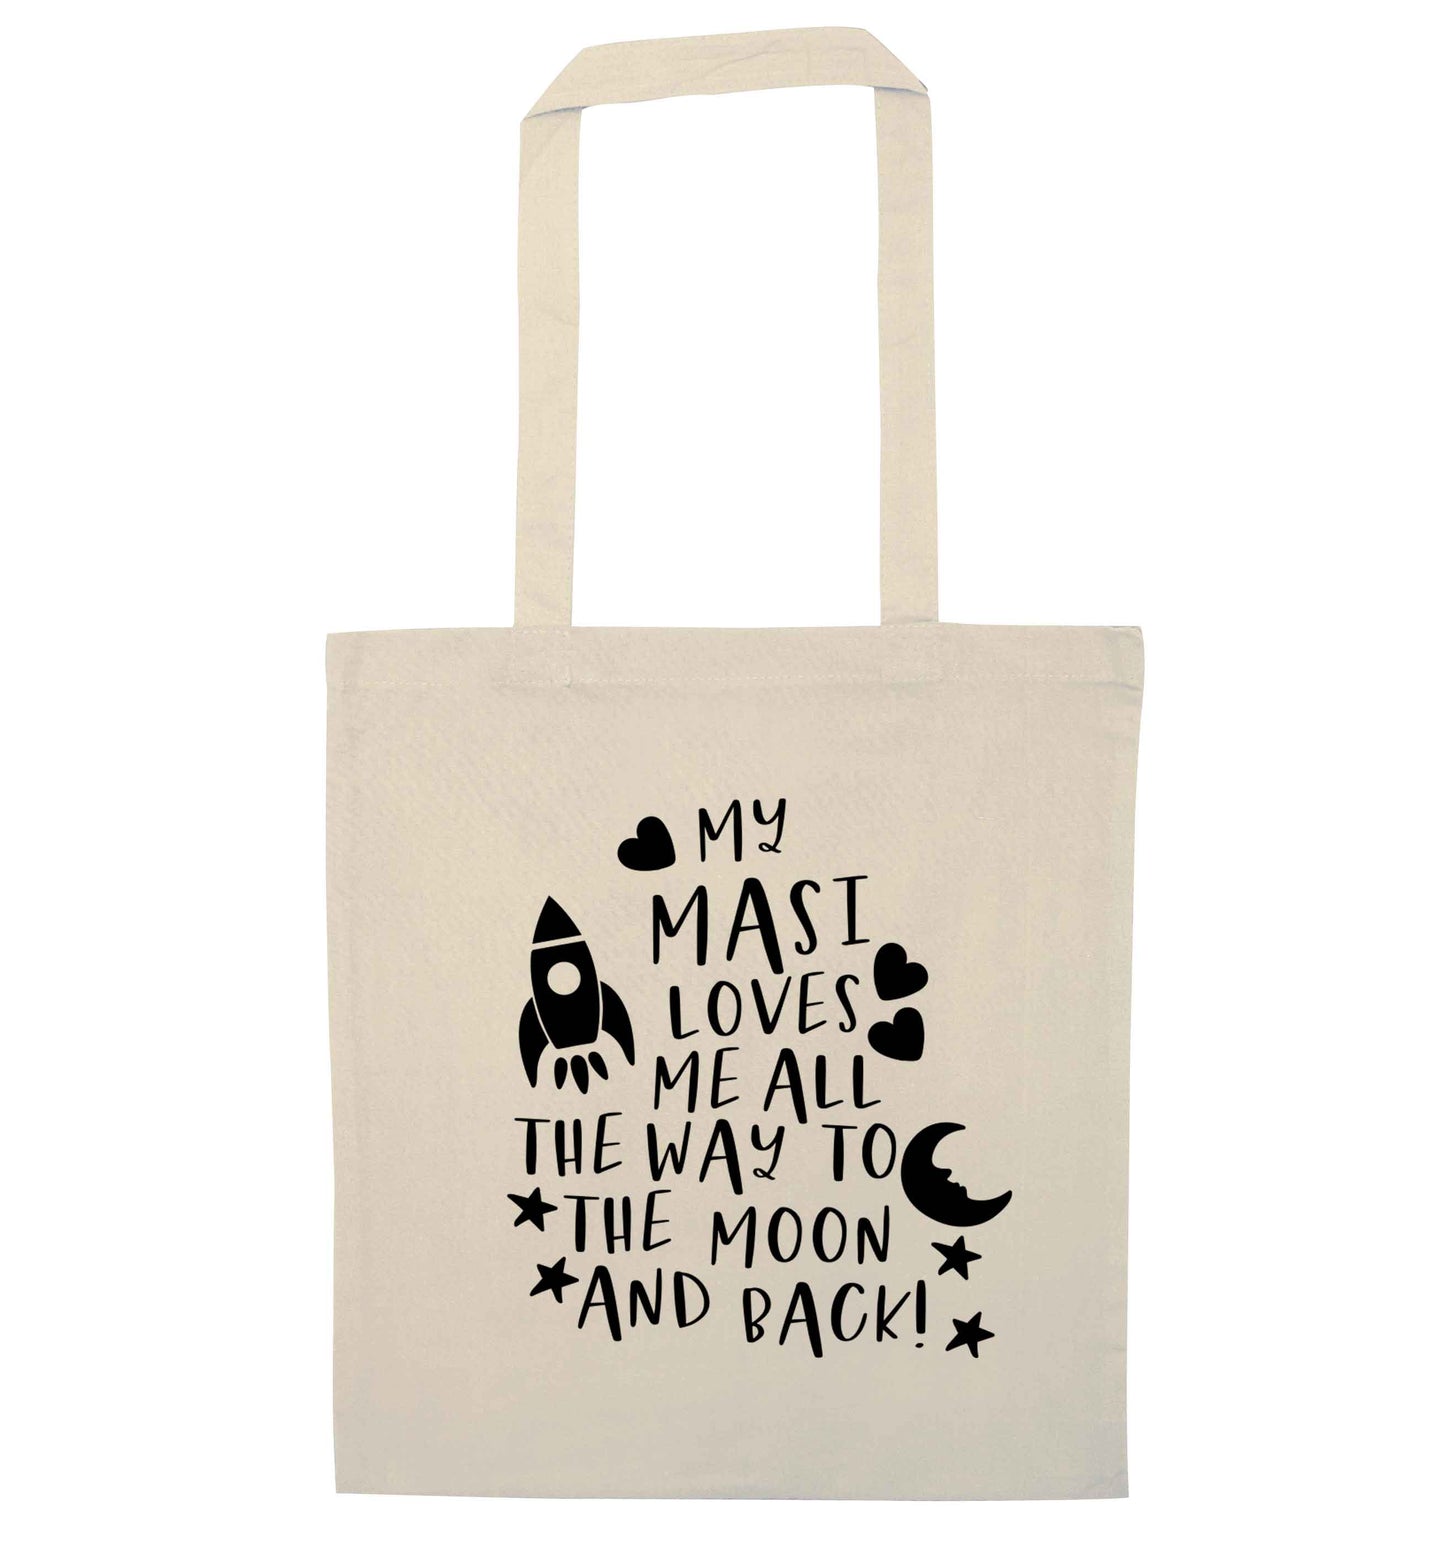 My masi loves me all the way to the moon and back natural tote bag